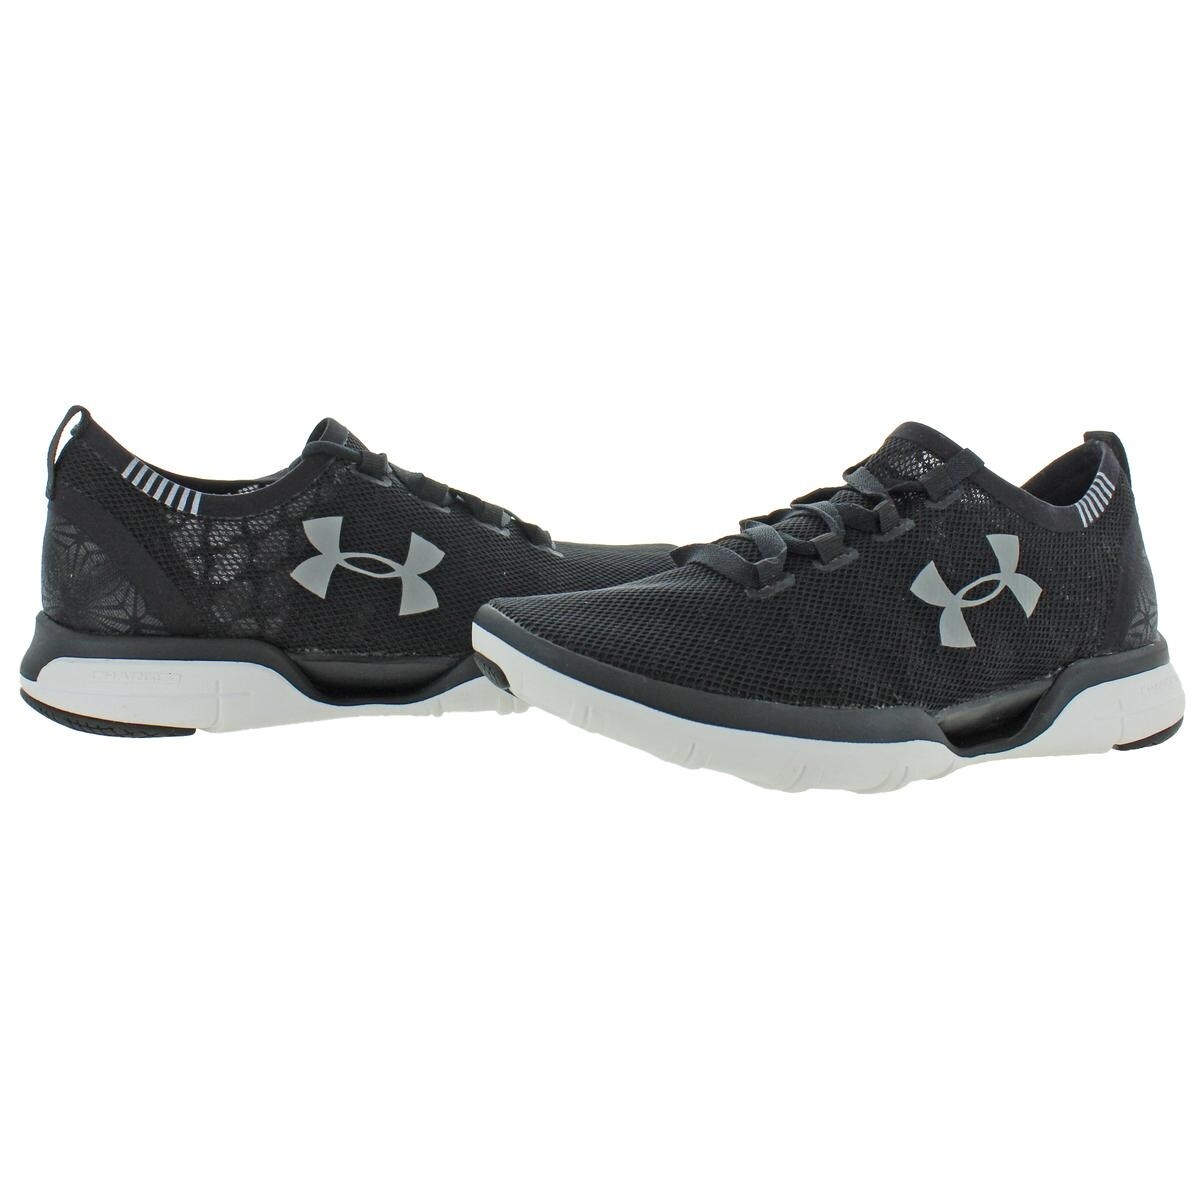 under armour coolswitch running shoes